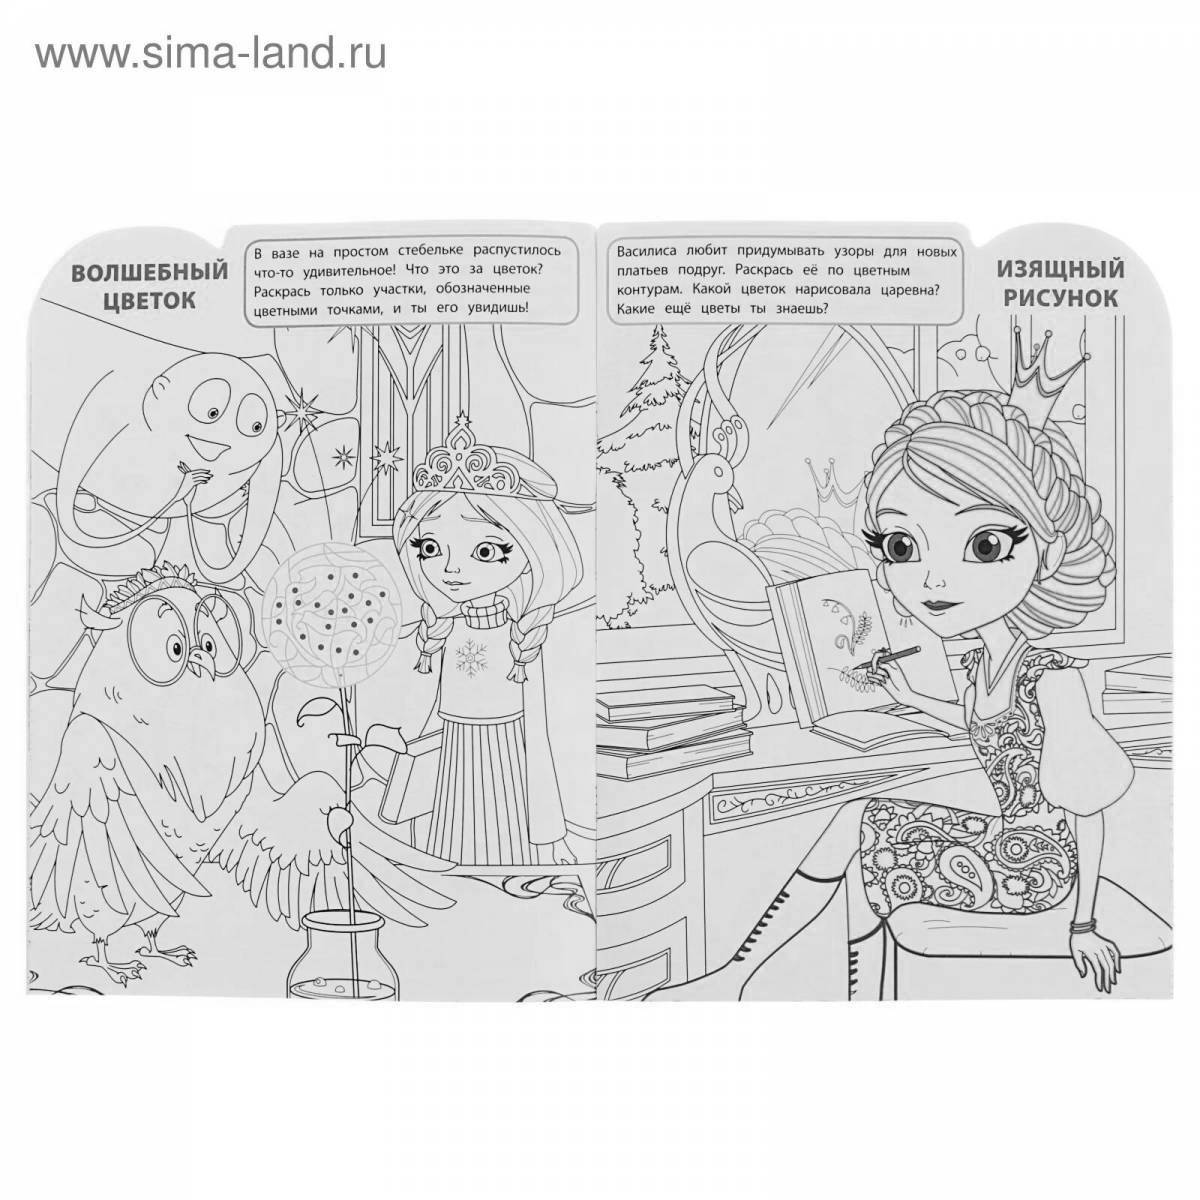 Funny princesses are preparing coloring pages